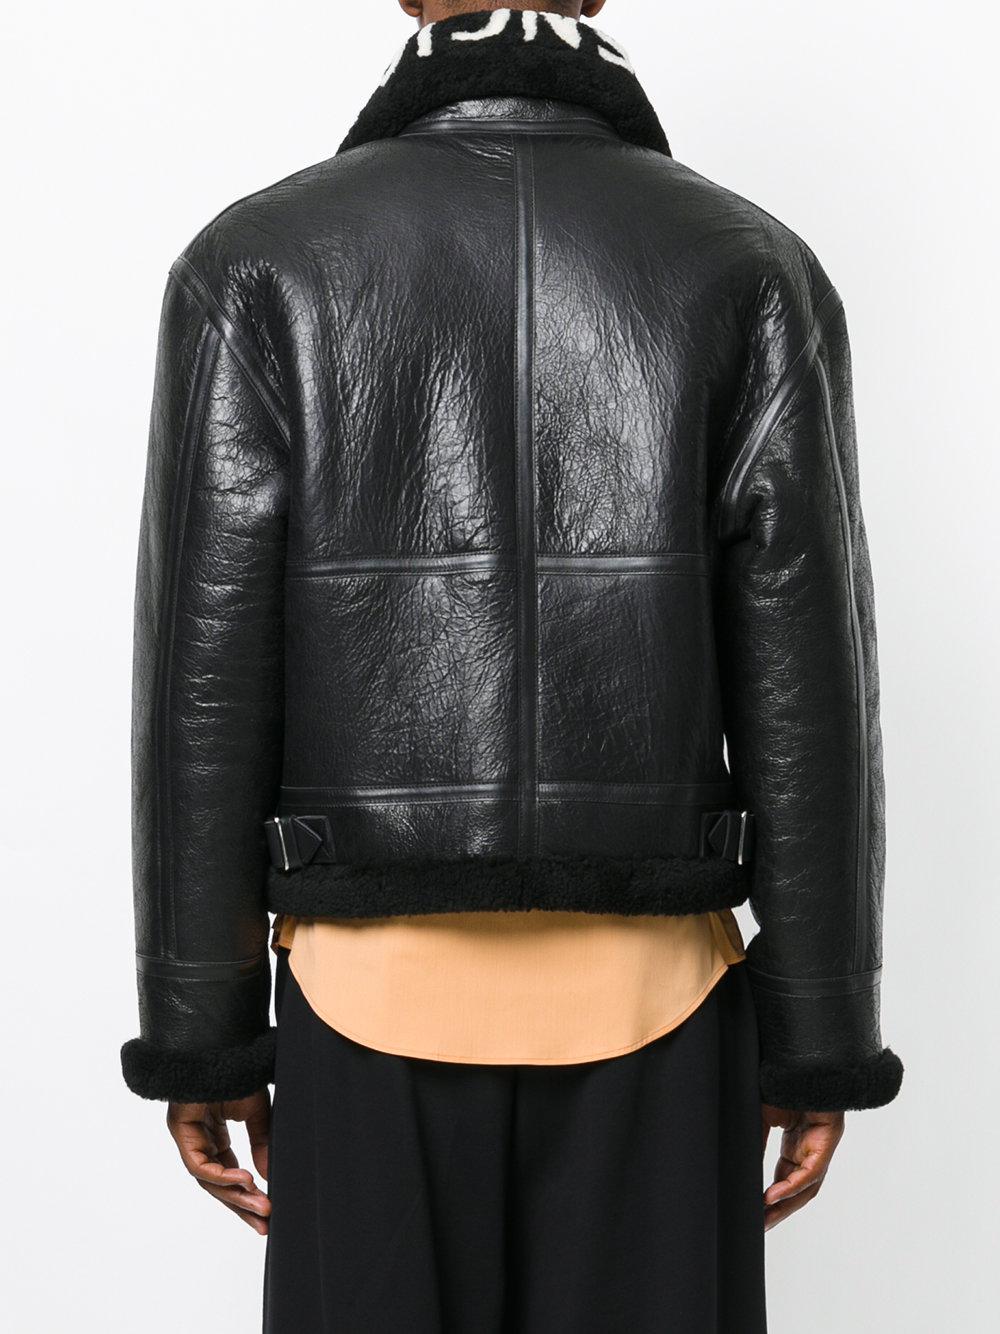 Balenciaga Bombardier Shearling Leather Jacket in Black for Men - Lyst